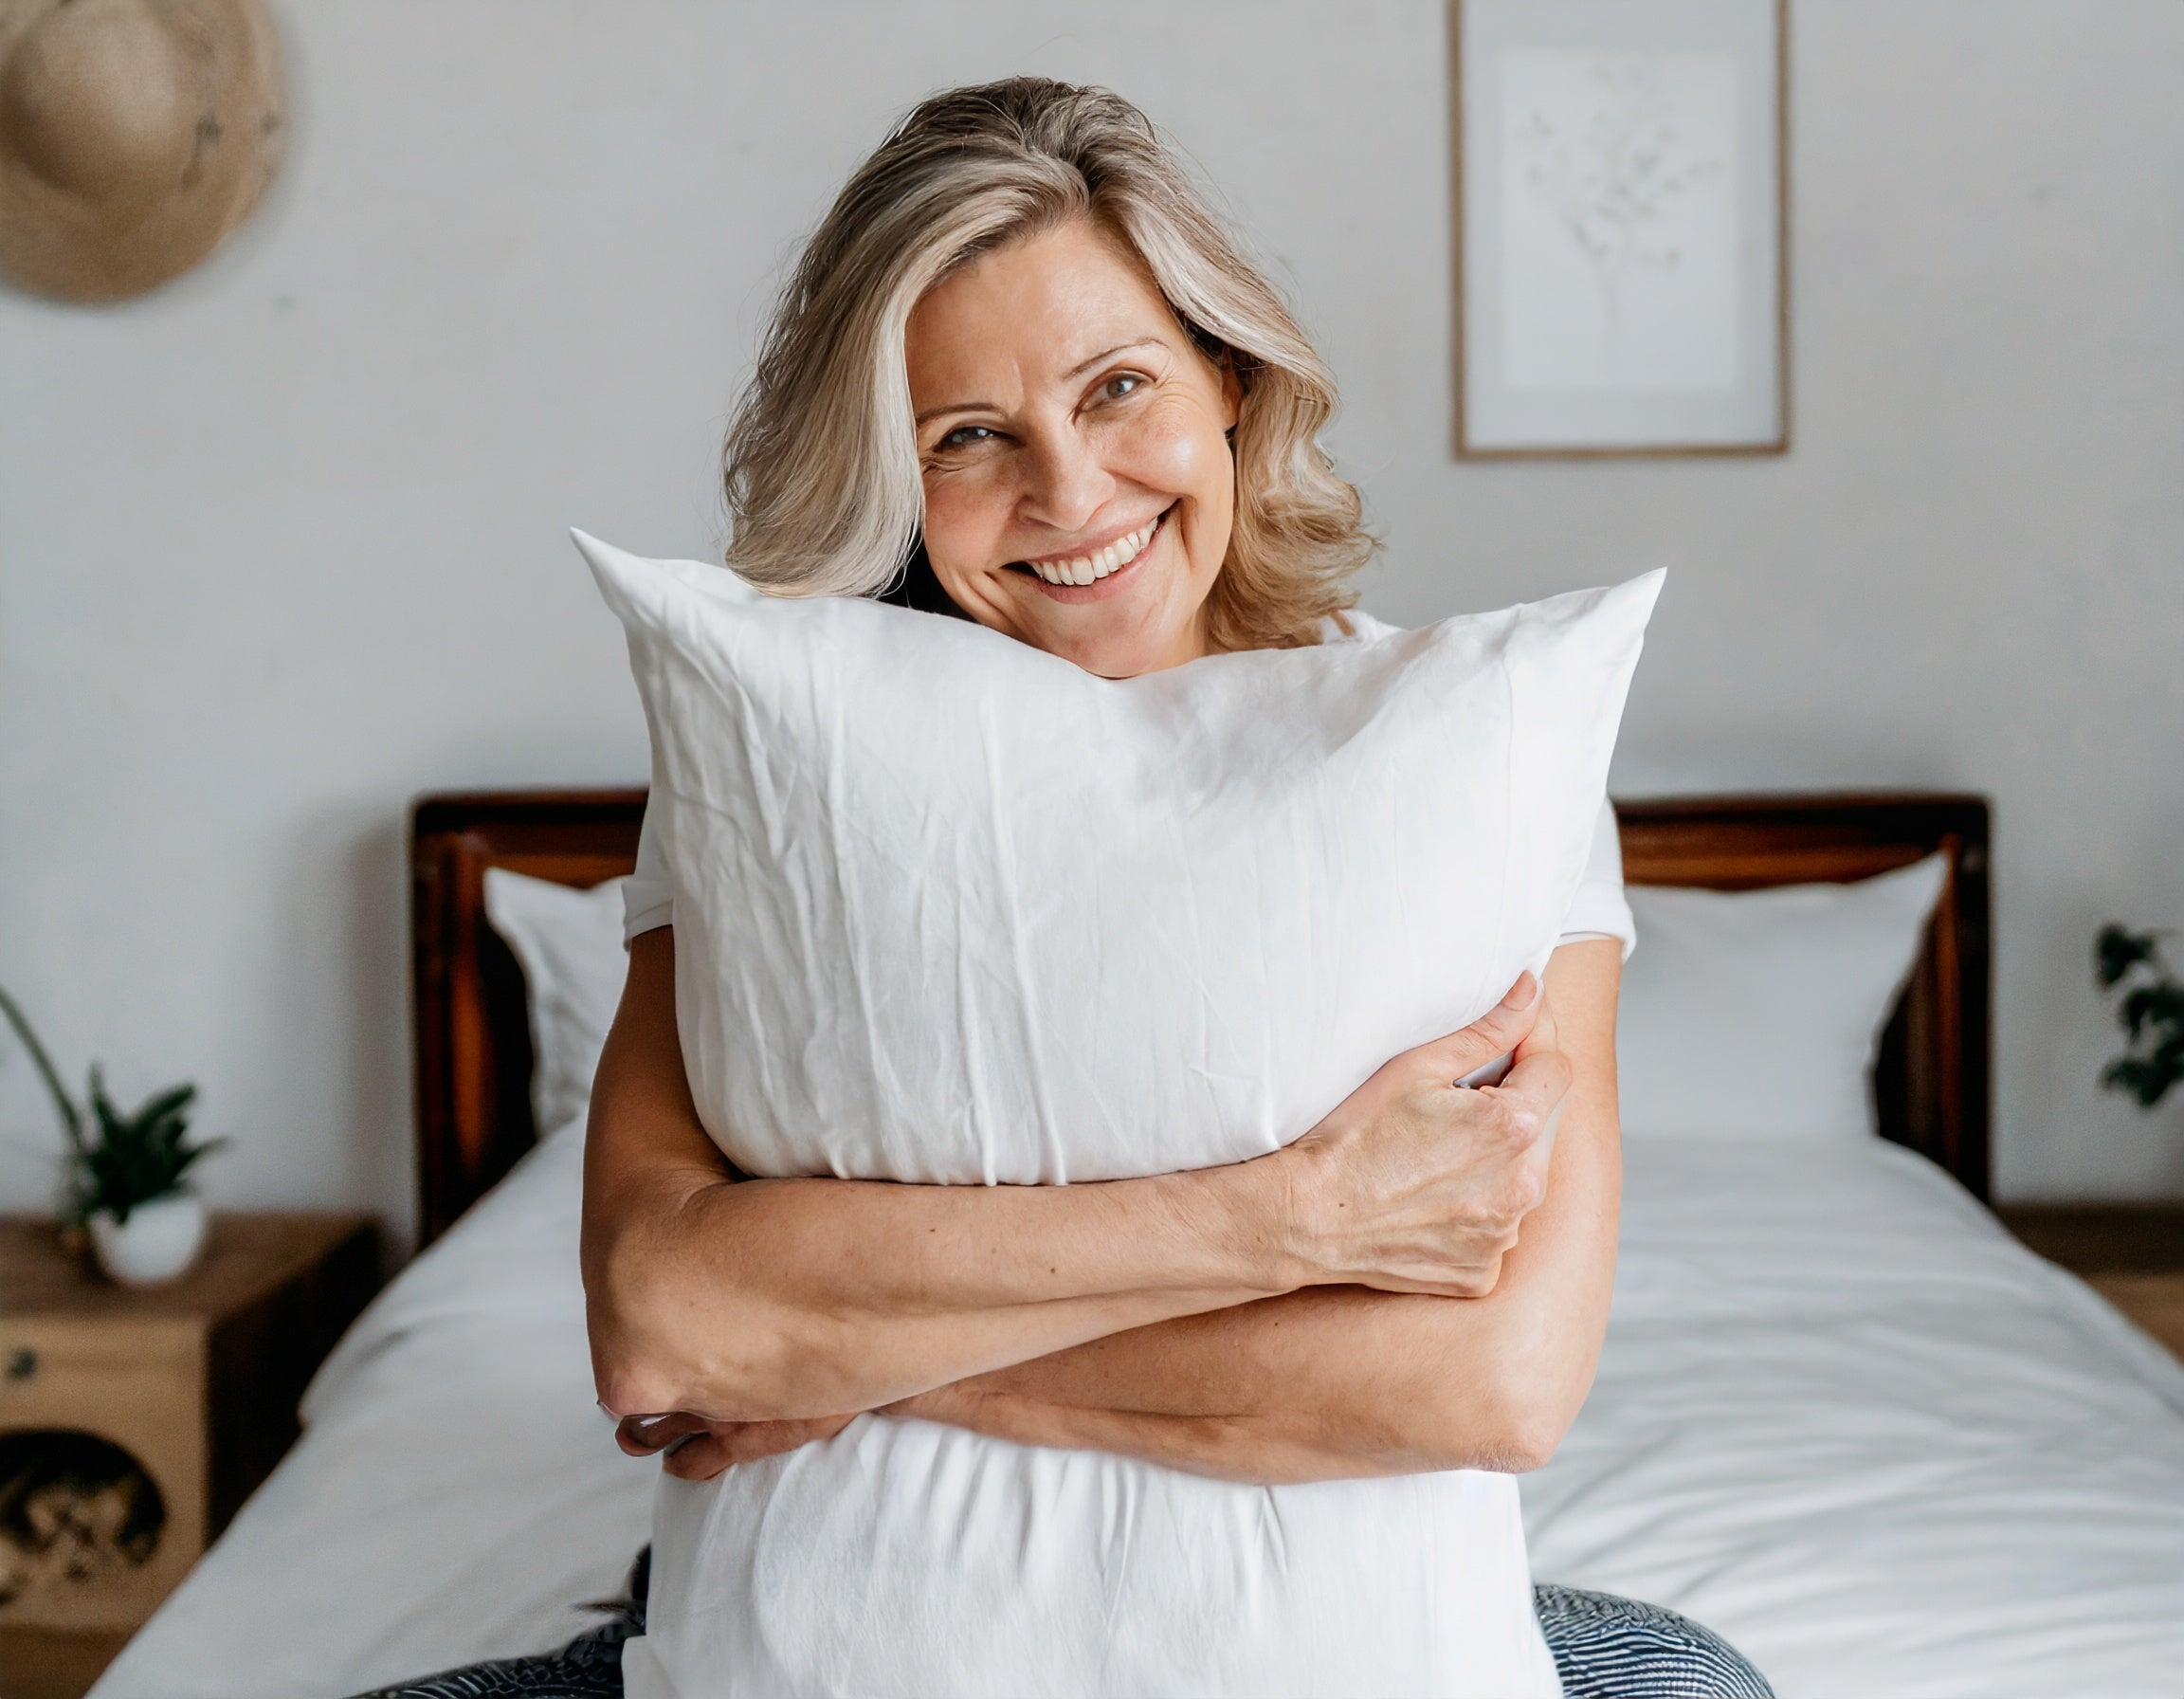 Firefly middle age women hugging a white pillow which they find comfortable in a Scandinavian style .jpg__PID:5b892ff3-d6aa-4c85-afb8-290d107b660d